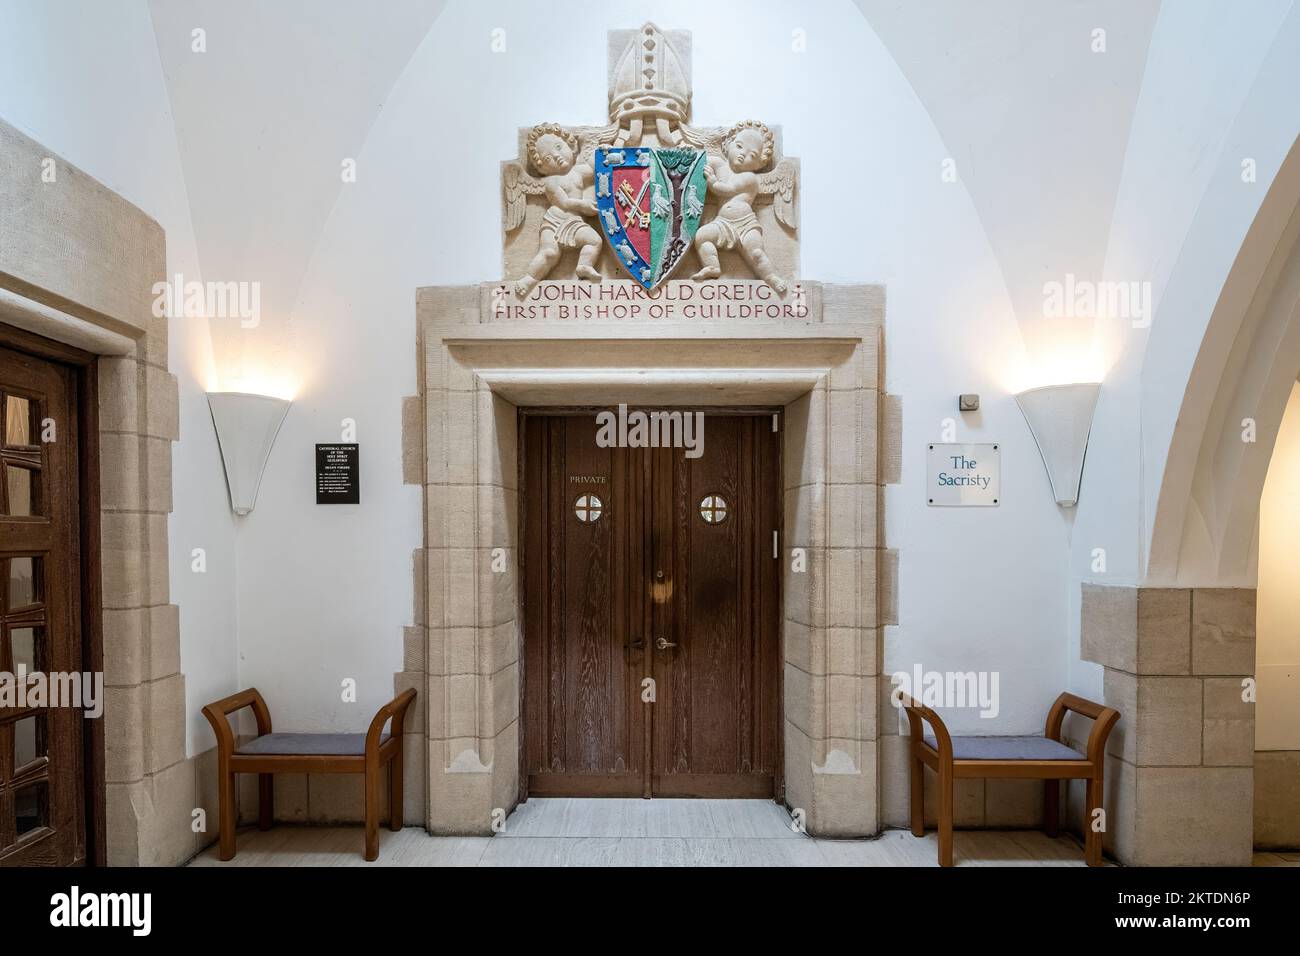 Ornate entrance to the Sacristy inside Guildford Cathedral, Surrey, England, UK Stock Photo